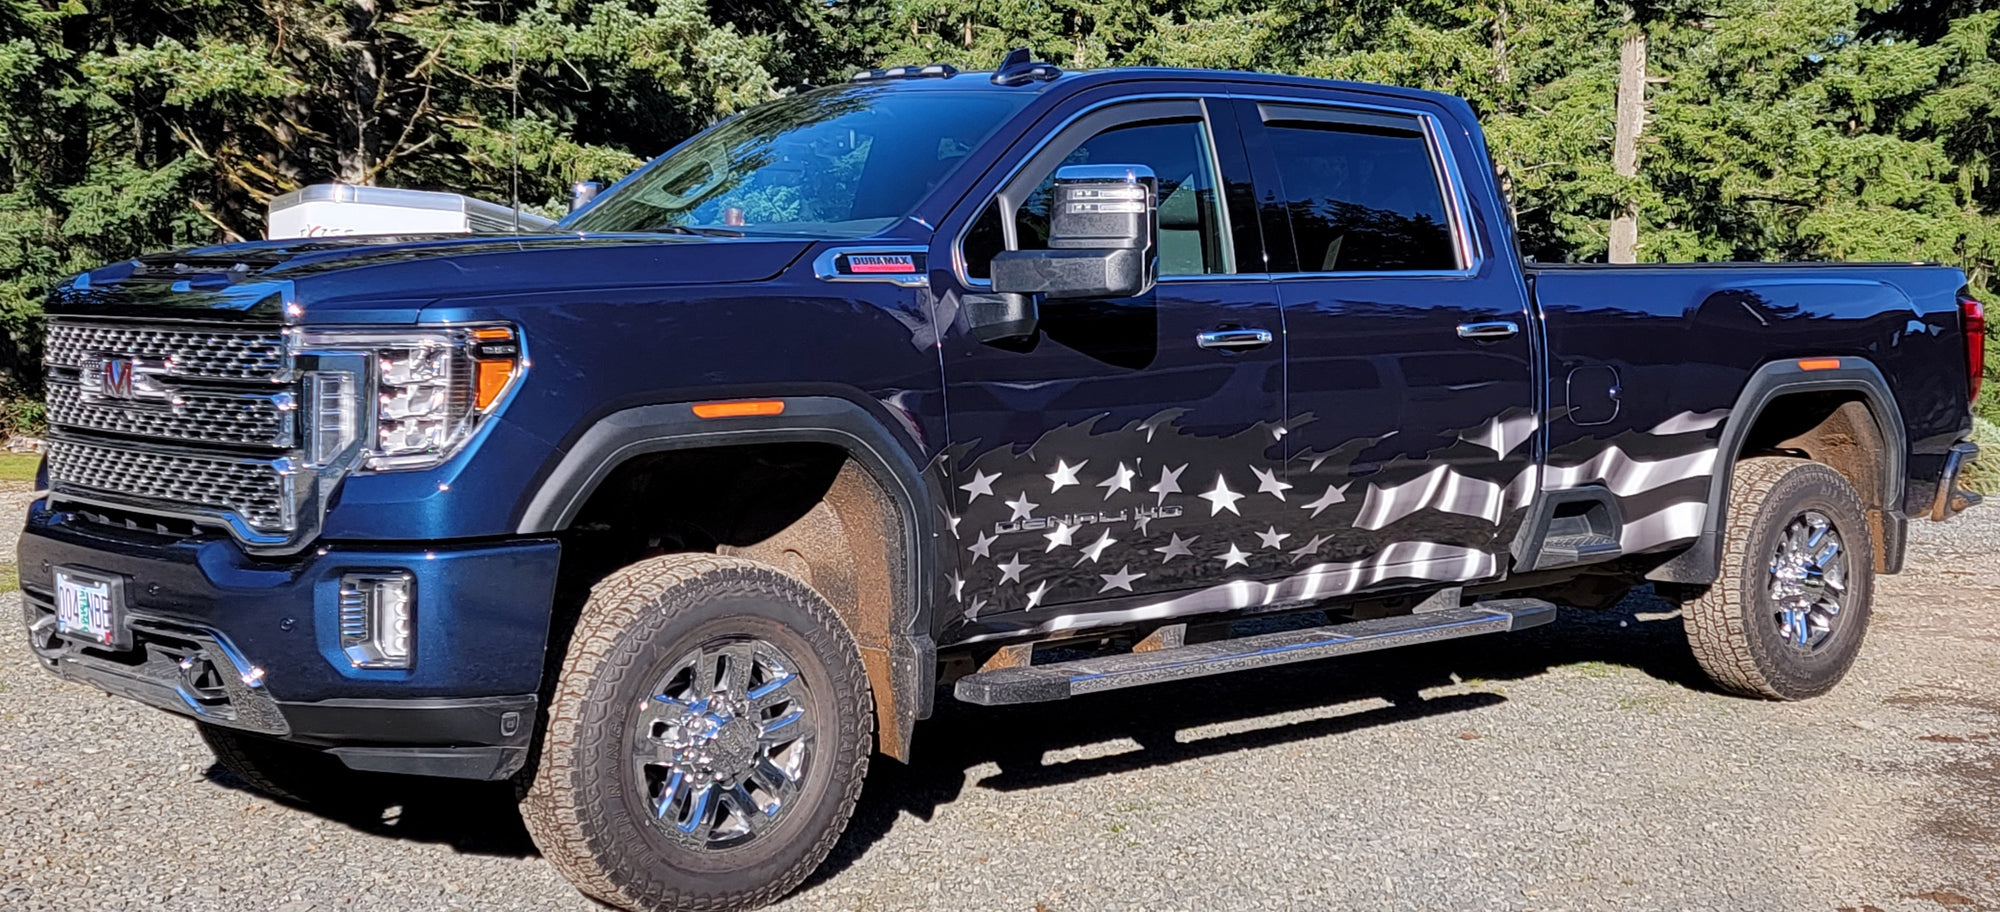 American flag black and white wrap on Blue Gmc Truck